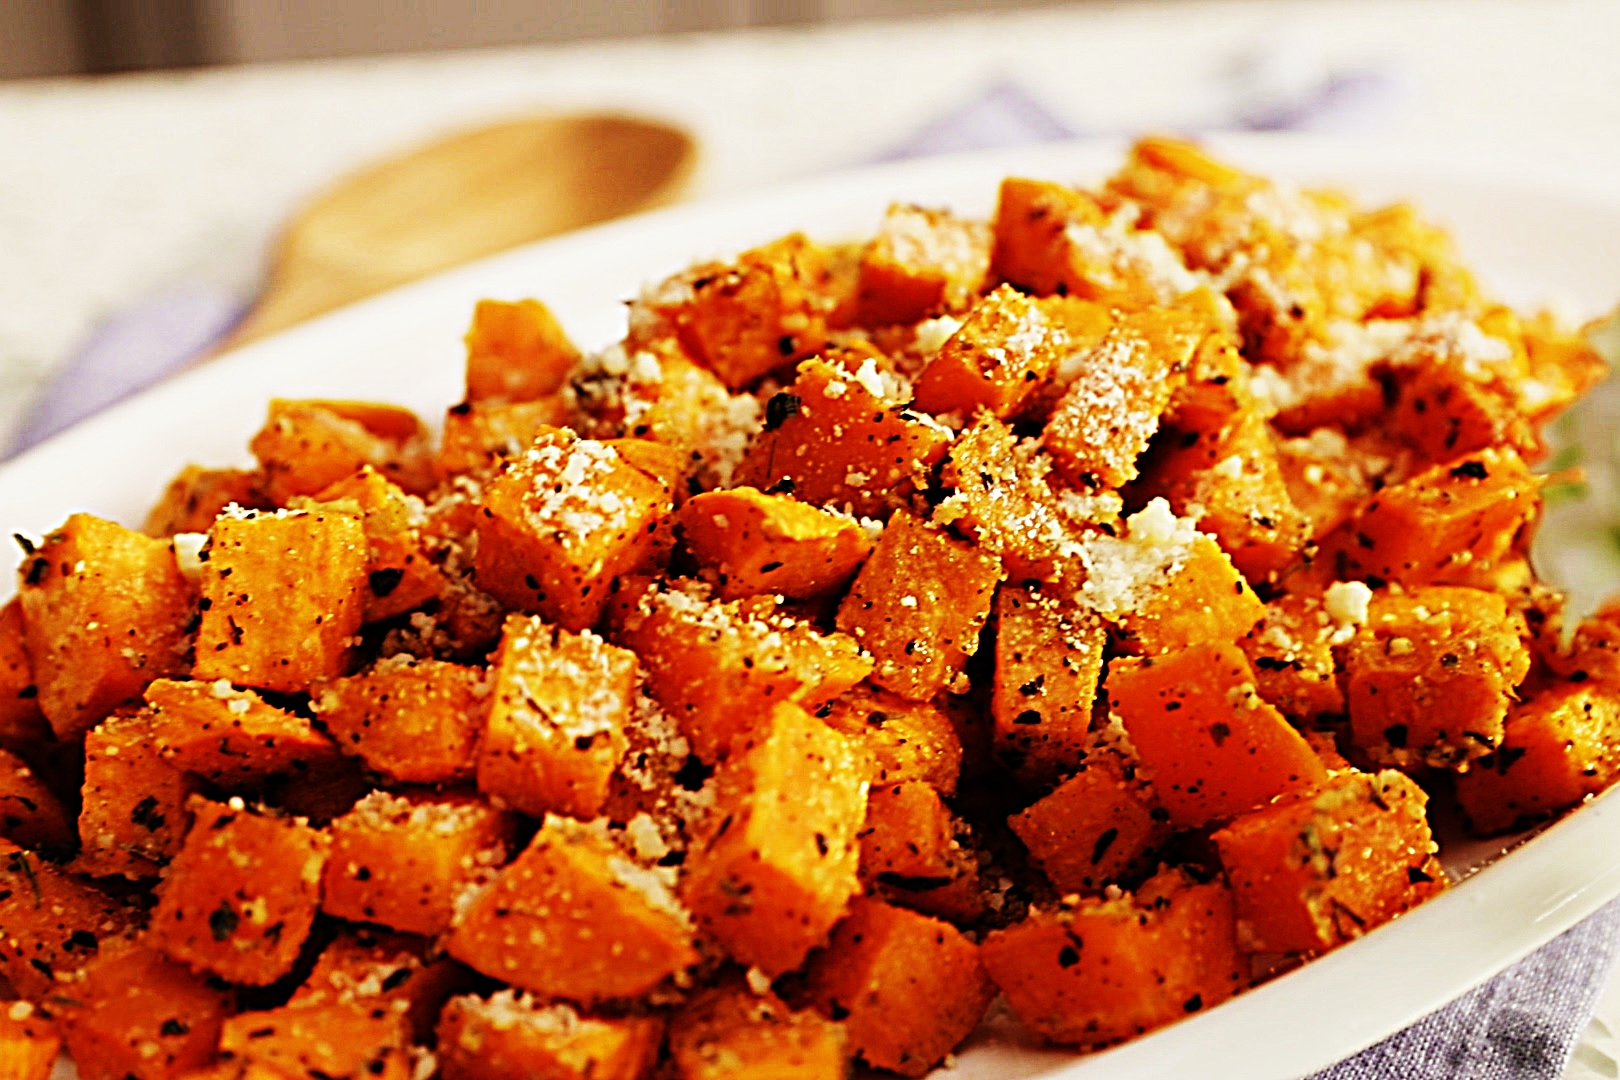 Stupid-Easy Recipe for Roasted Parmesan Herb Sweet Potatoes (#1 Top-Rated)